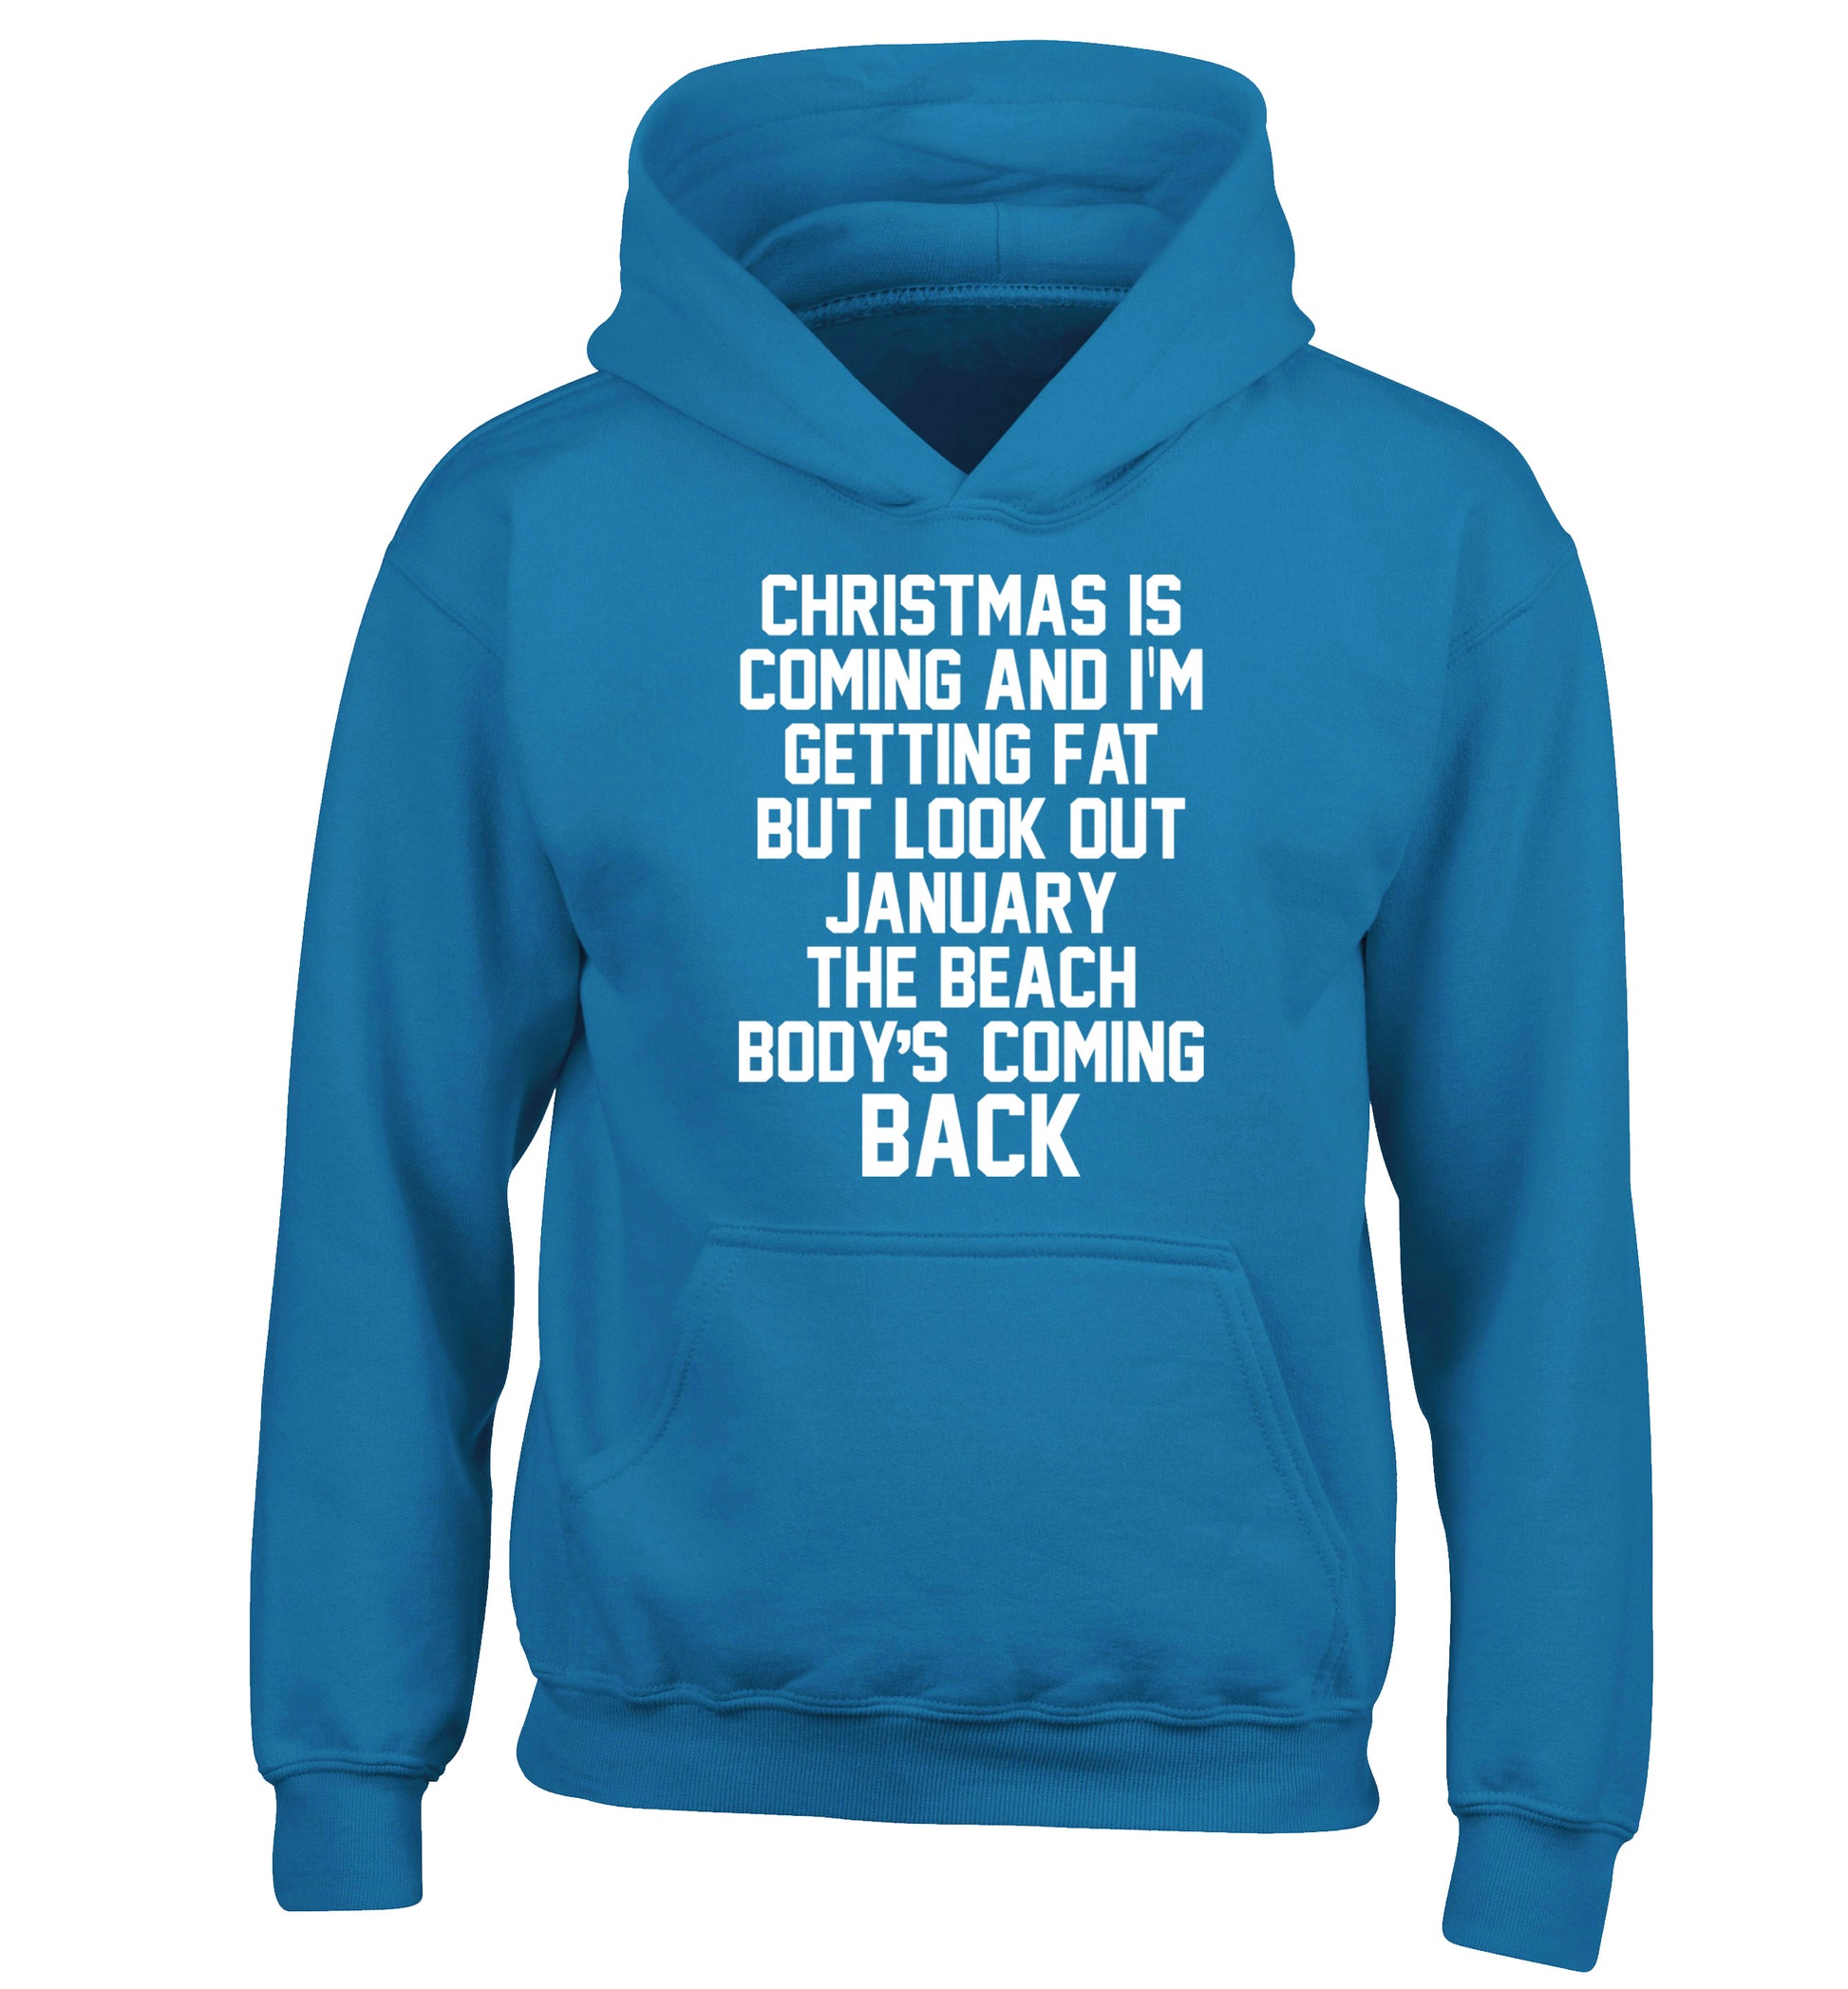 Christmas is coming and I'm getting fat but look out January the beach body's coming back! children's blue hoodie 12-14 Years